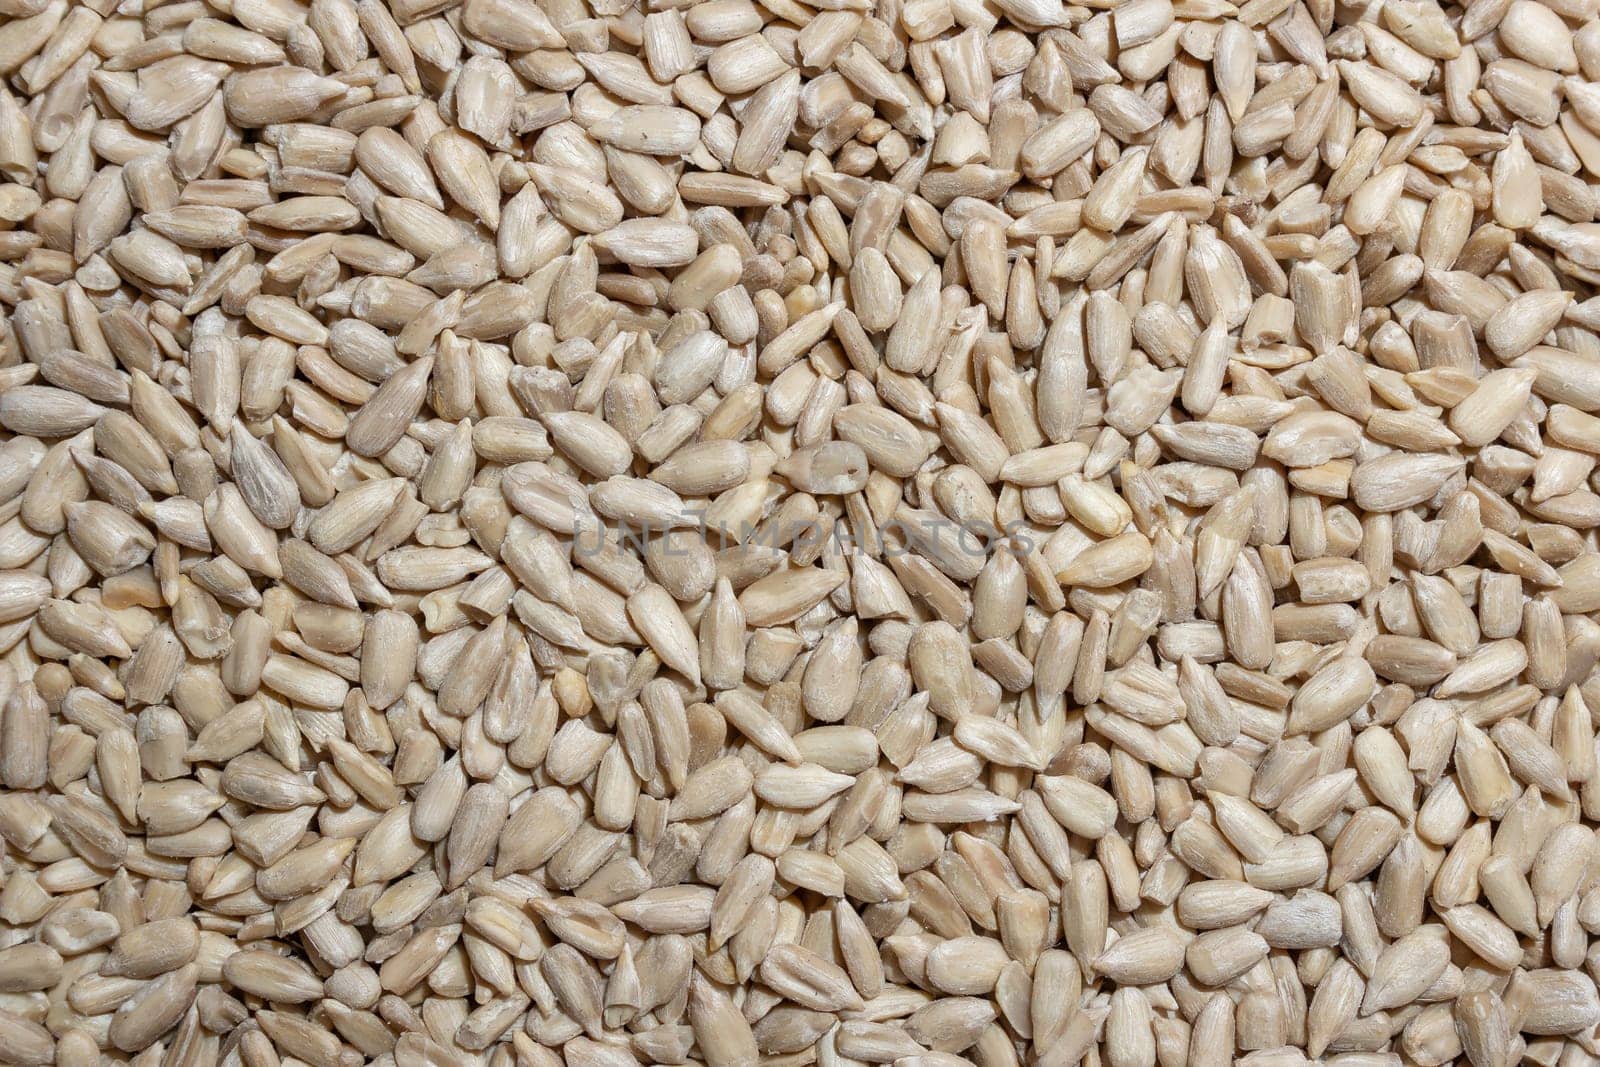 Peeled Sunflower Seeds Background: A Culinary Canvas of Shell-free Sunflower Seeds, Creating a Lively and Textured Background for Gourmet Cooking - Top View, Flat Lay